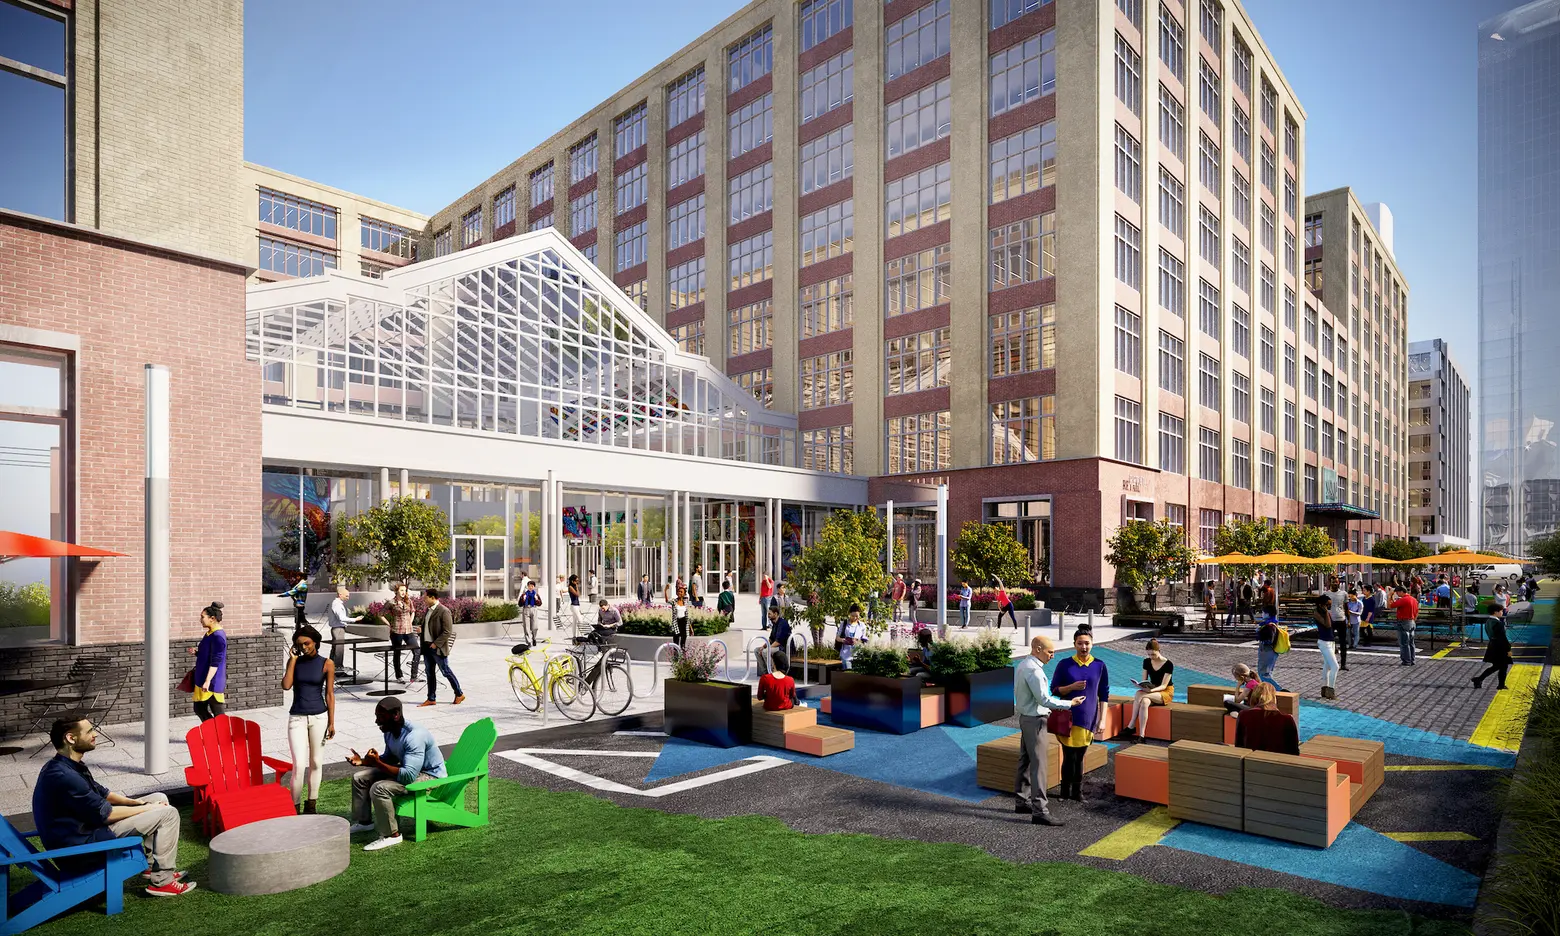 Jersey City’s Harborside complex reveals waterfront outdoor space and perks like Smorgasburg